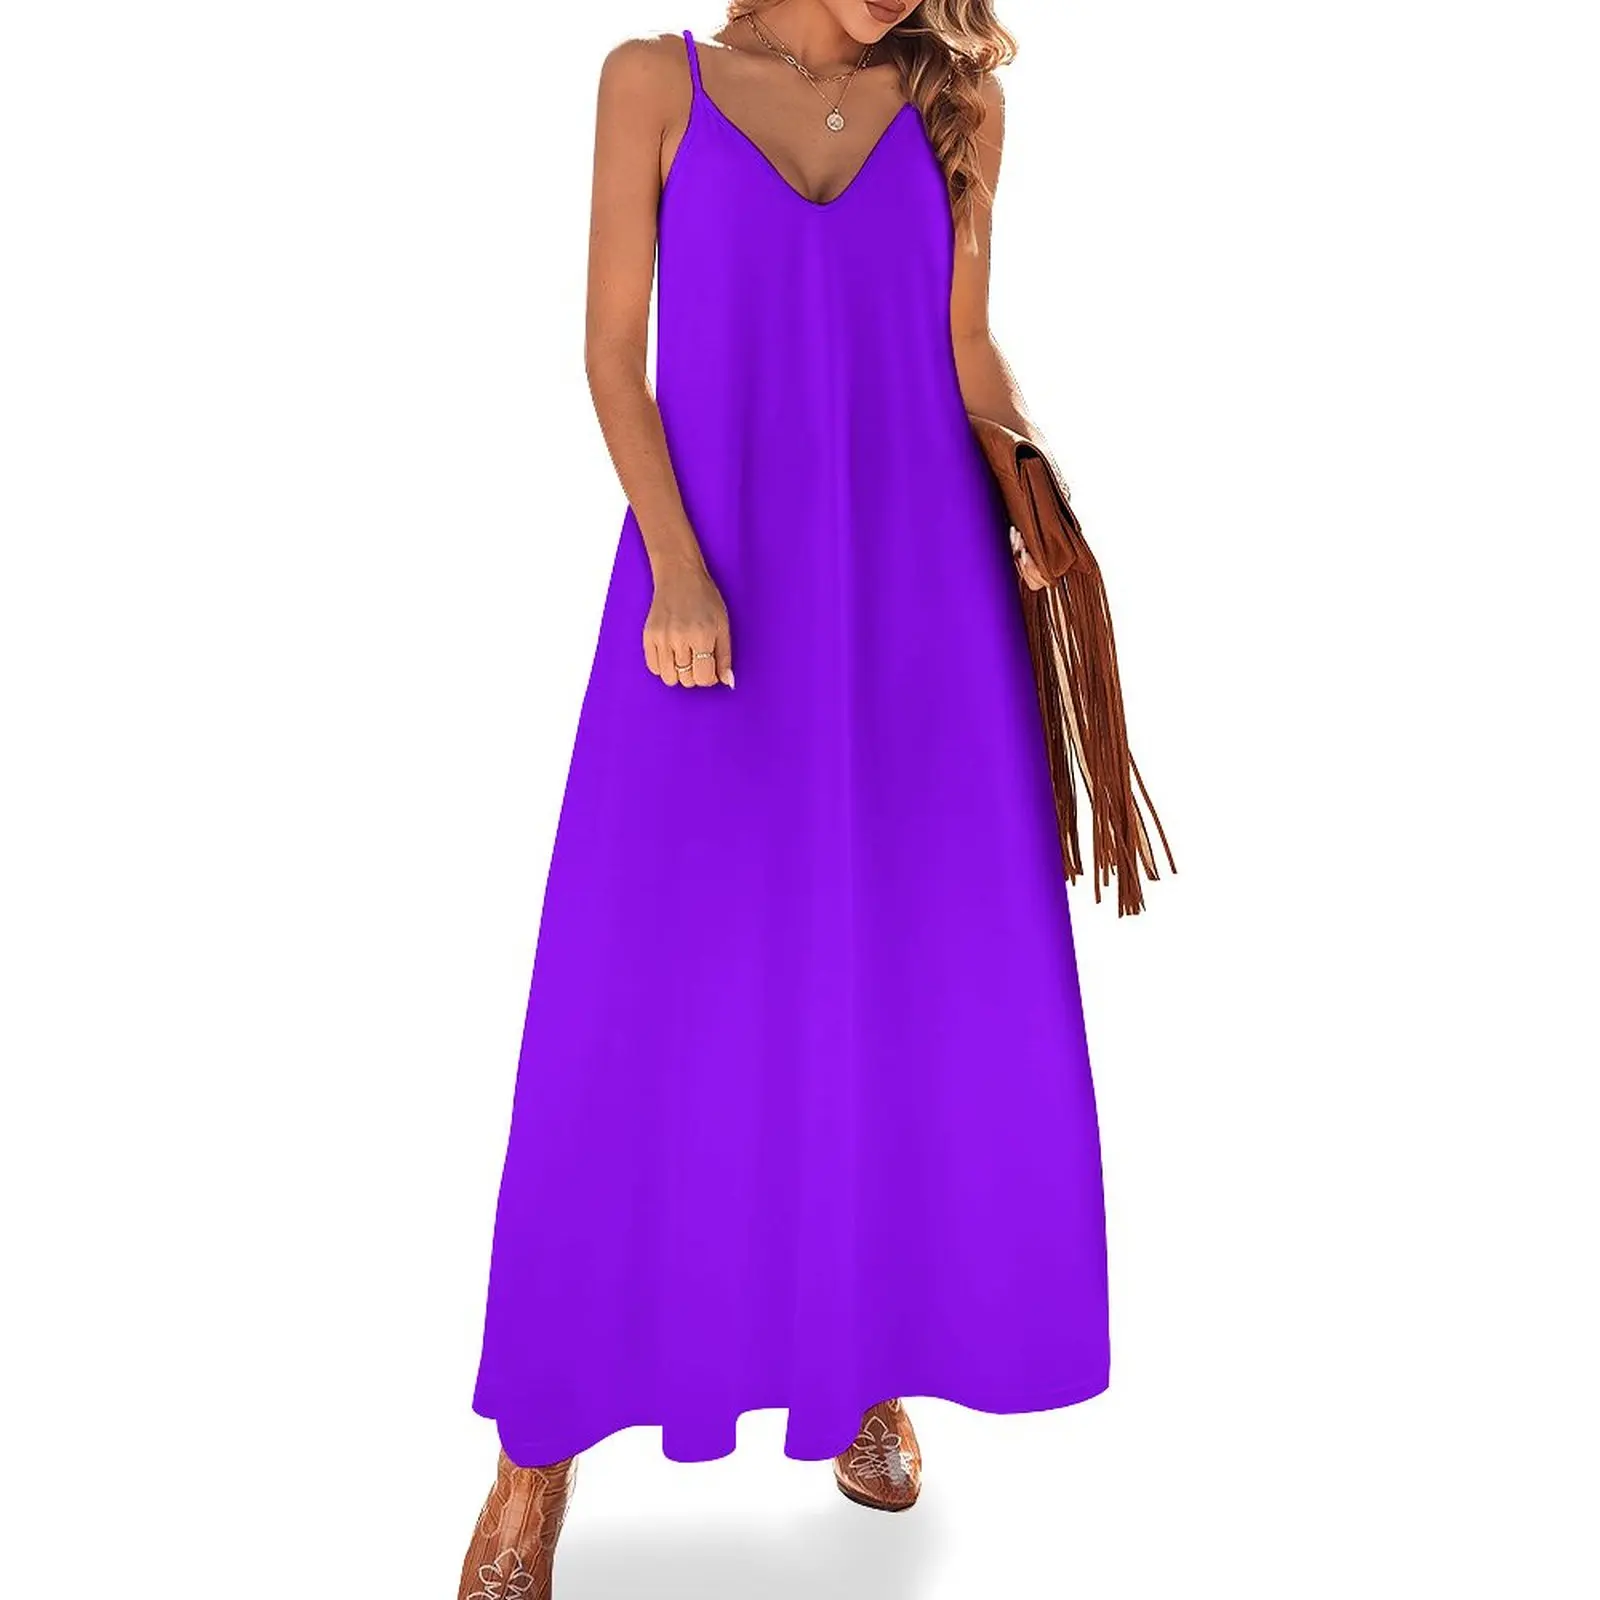 

New SOLID PLAIN Electric Violet Neon Violet OVER 100 SHADES OF PURPLE BY OZCUSHIONS Sleeveless Dress Long dress summer dresses